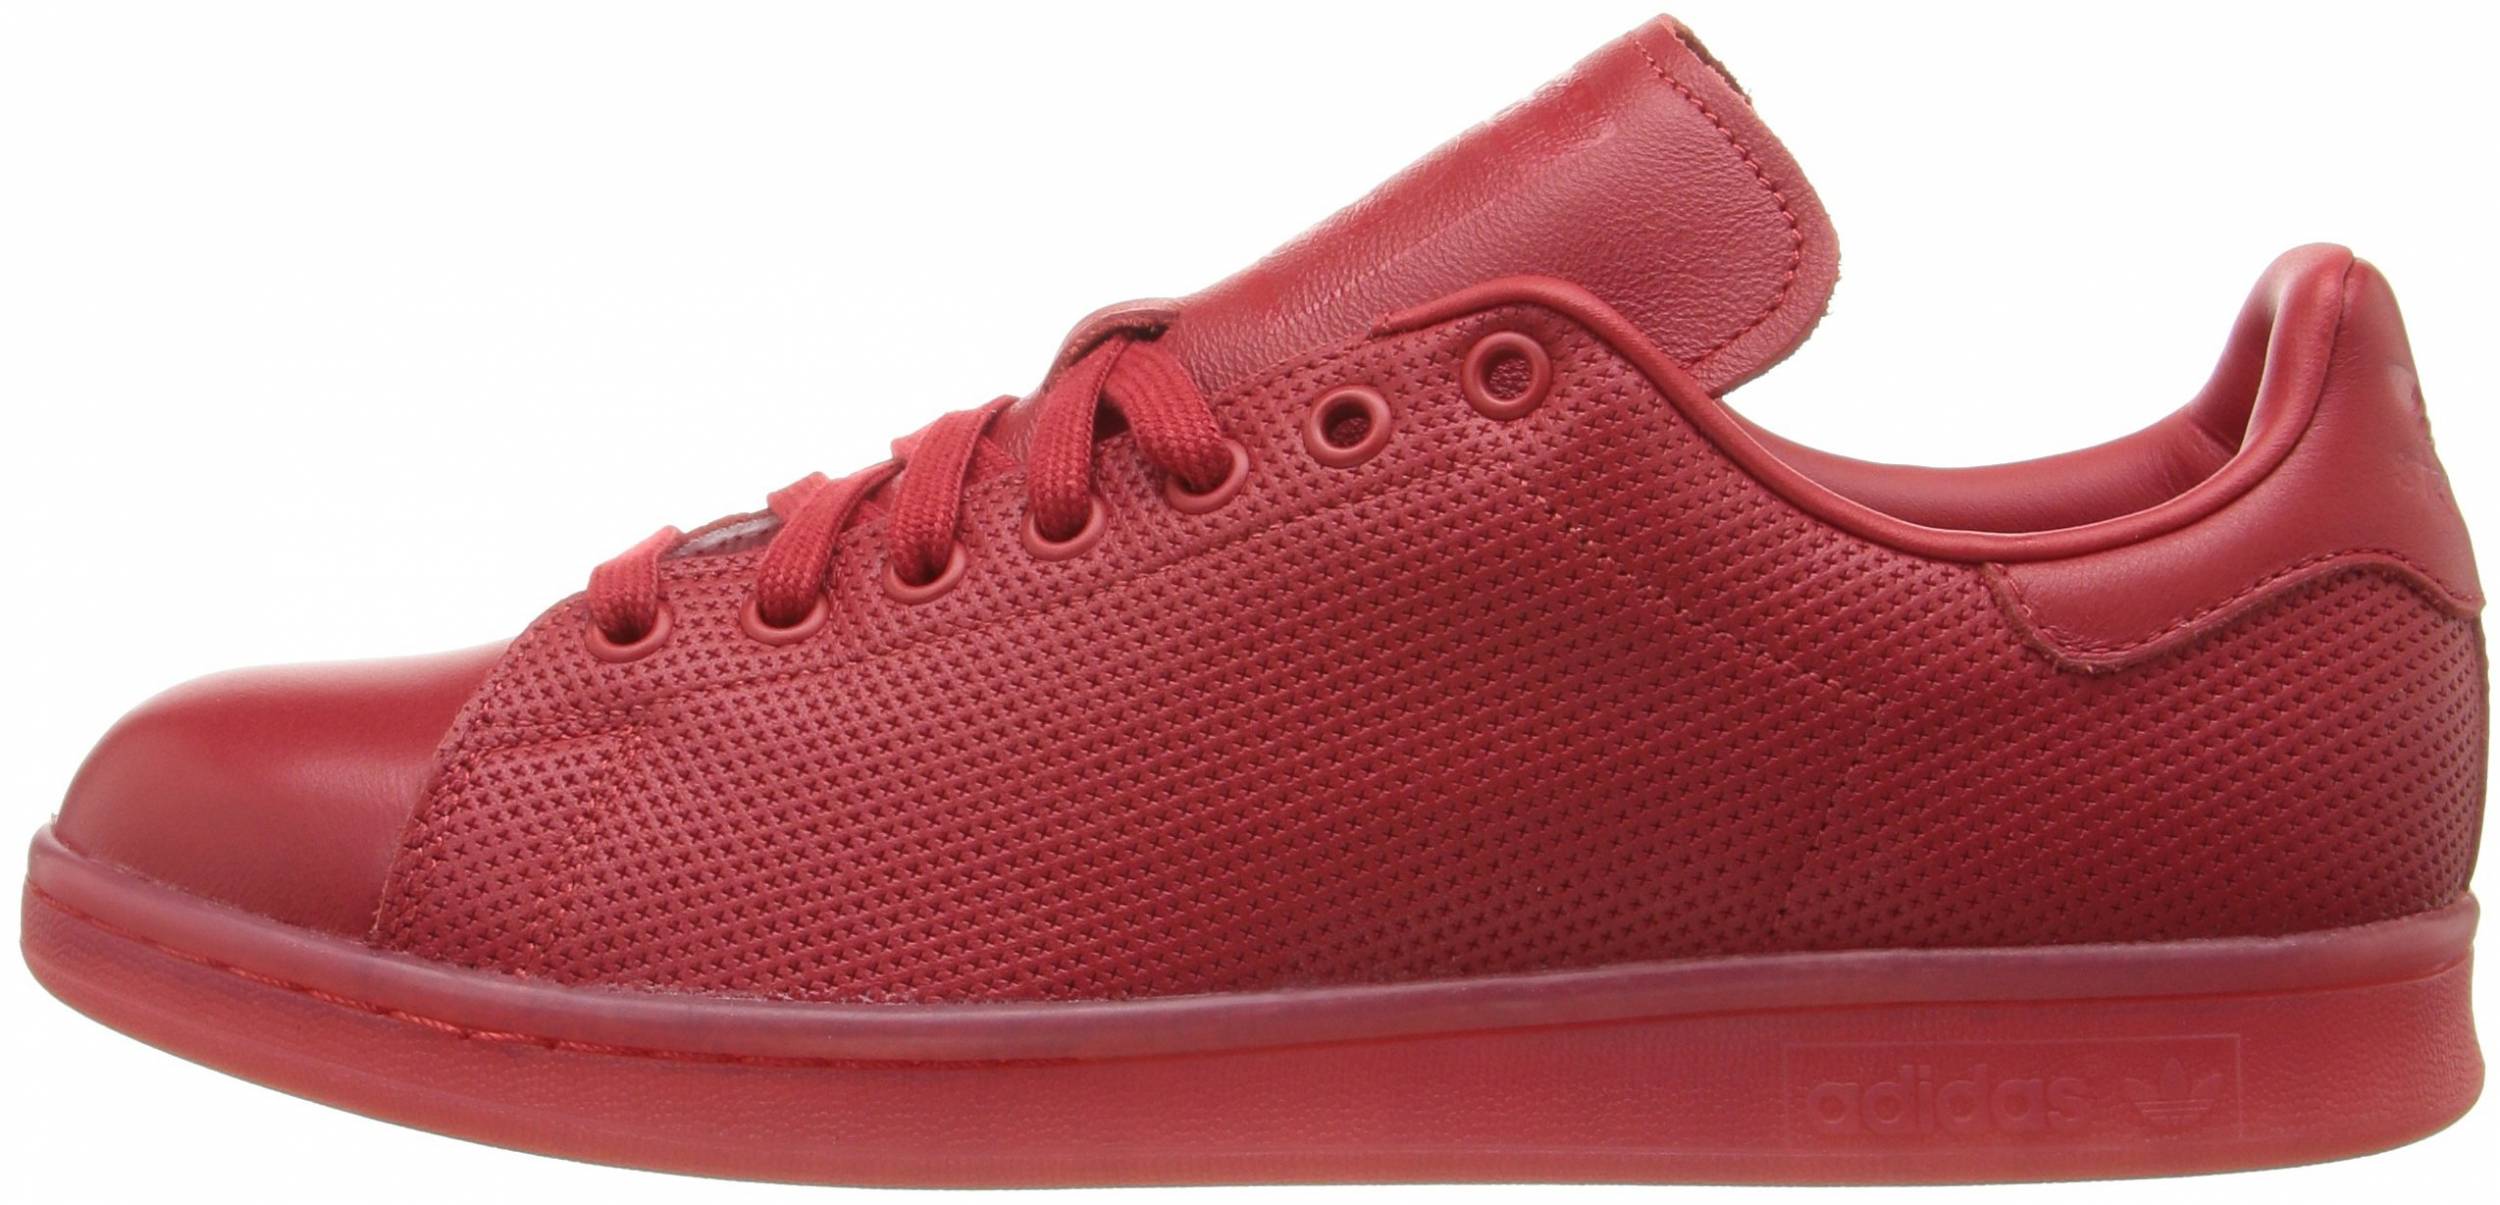 hobby tæppe Ni Adidas Stan Smith Adicolor sneakers in 3 colors (only $45) | RunRepeat